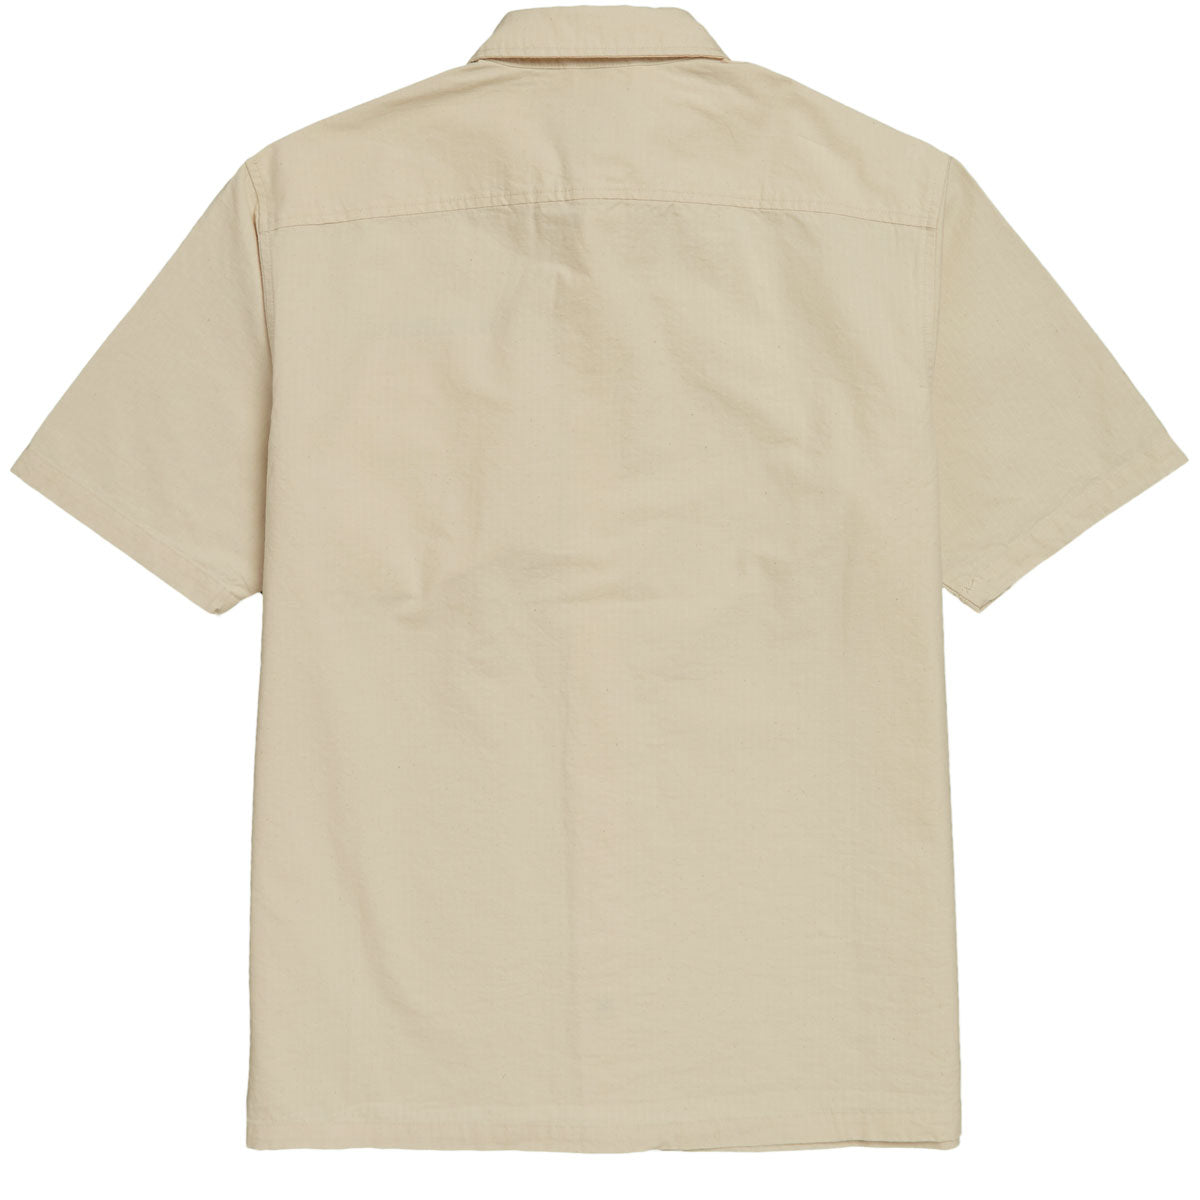 Bronze 56k Ripstop Button Up Shirt - Ivory image 2